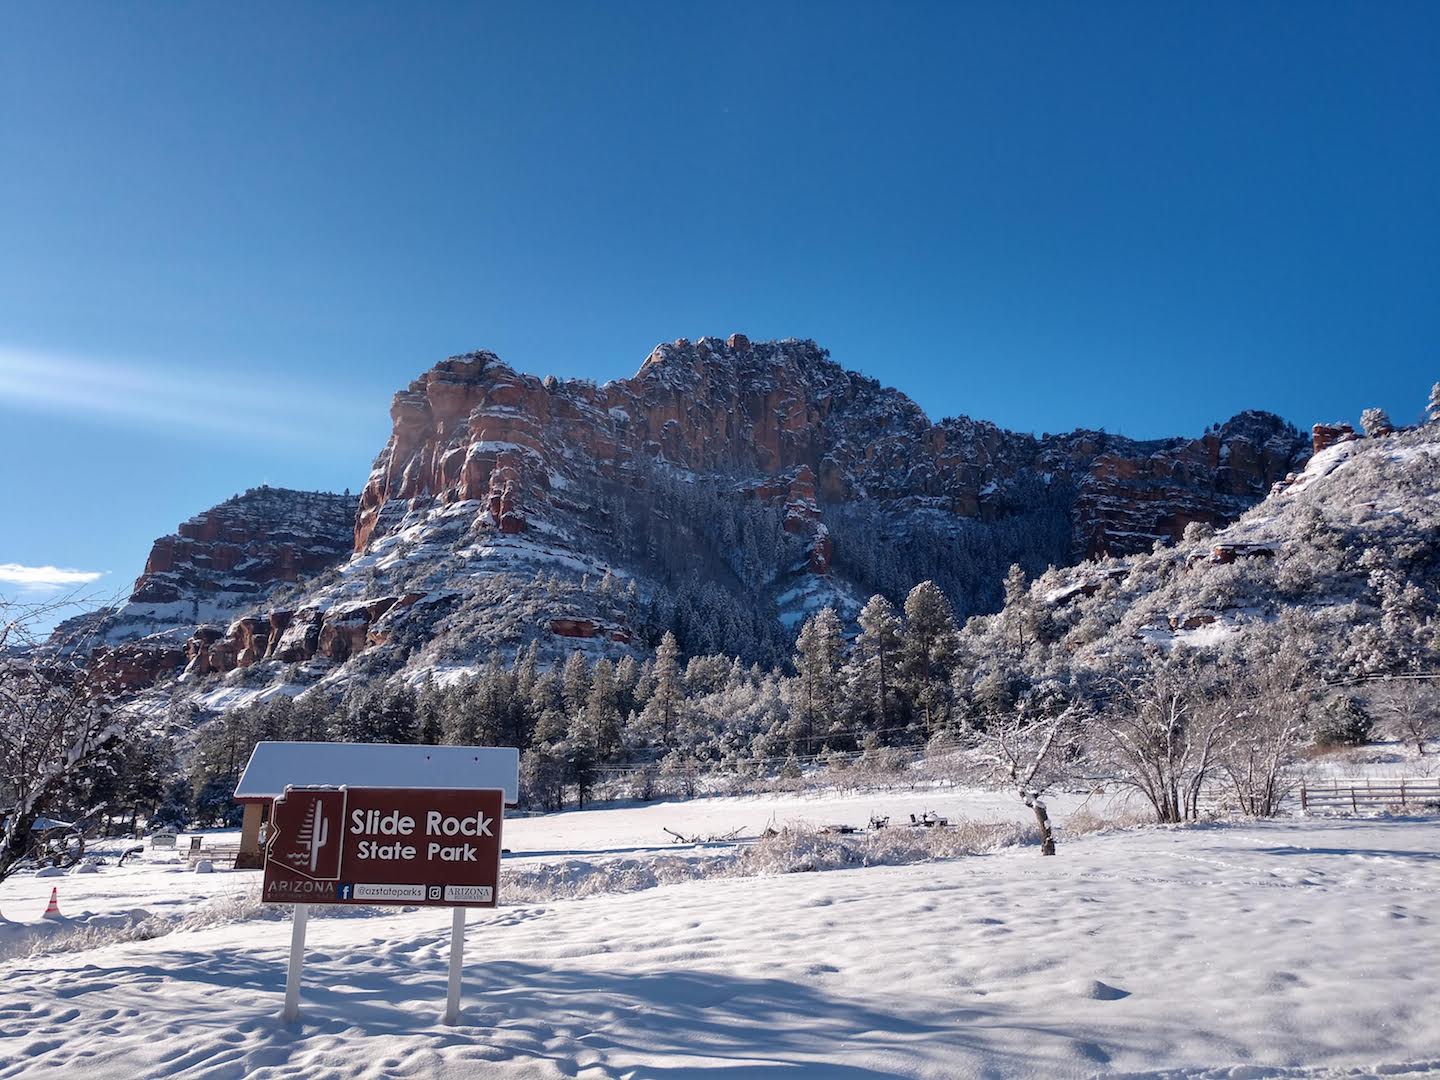 Winter snow blankets the grounds at Slide Rock State Park